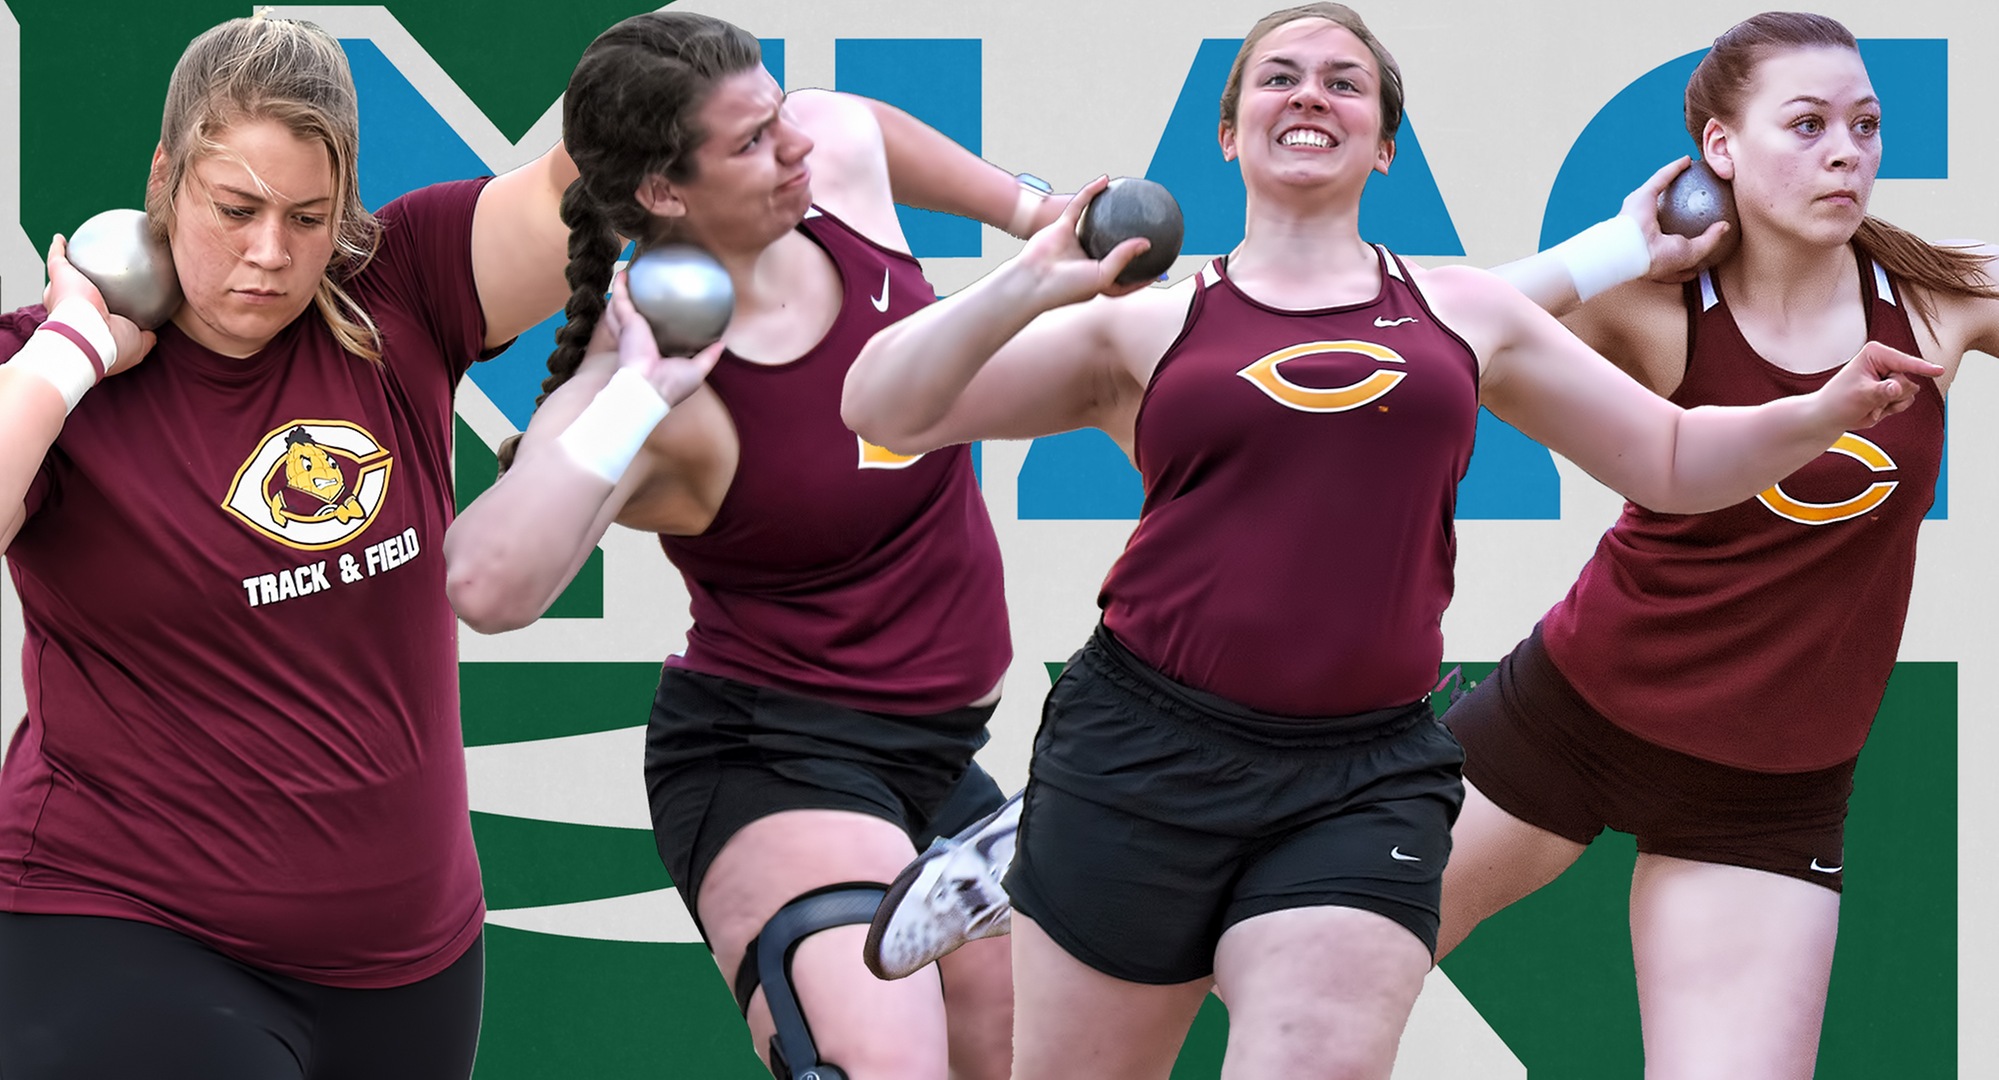 Kelsey Rajewski, Jacey Schlosser, Allyson Kangas and Cayle Hovland all placed in the Top 6 in the shot put at the MIAC Outdoor Championship Meet.